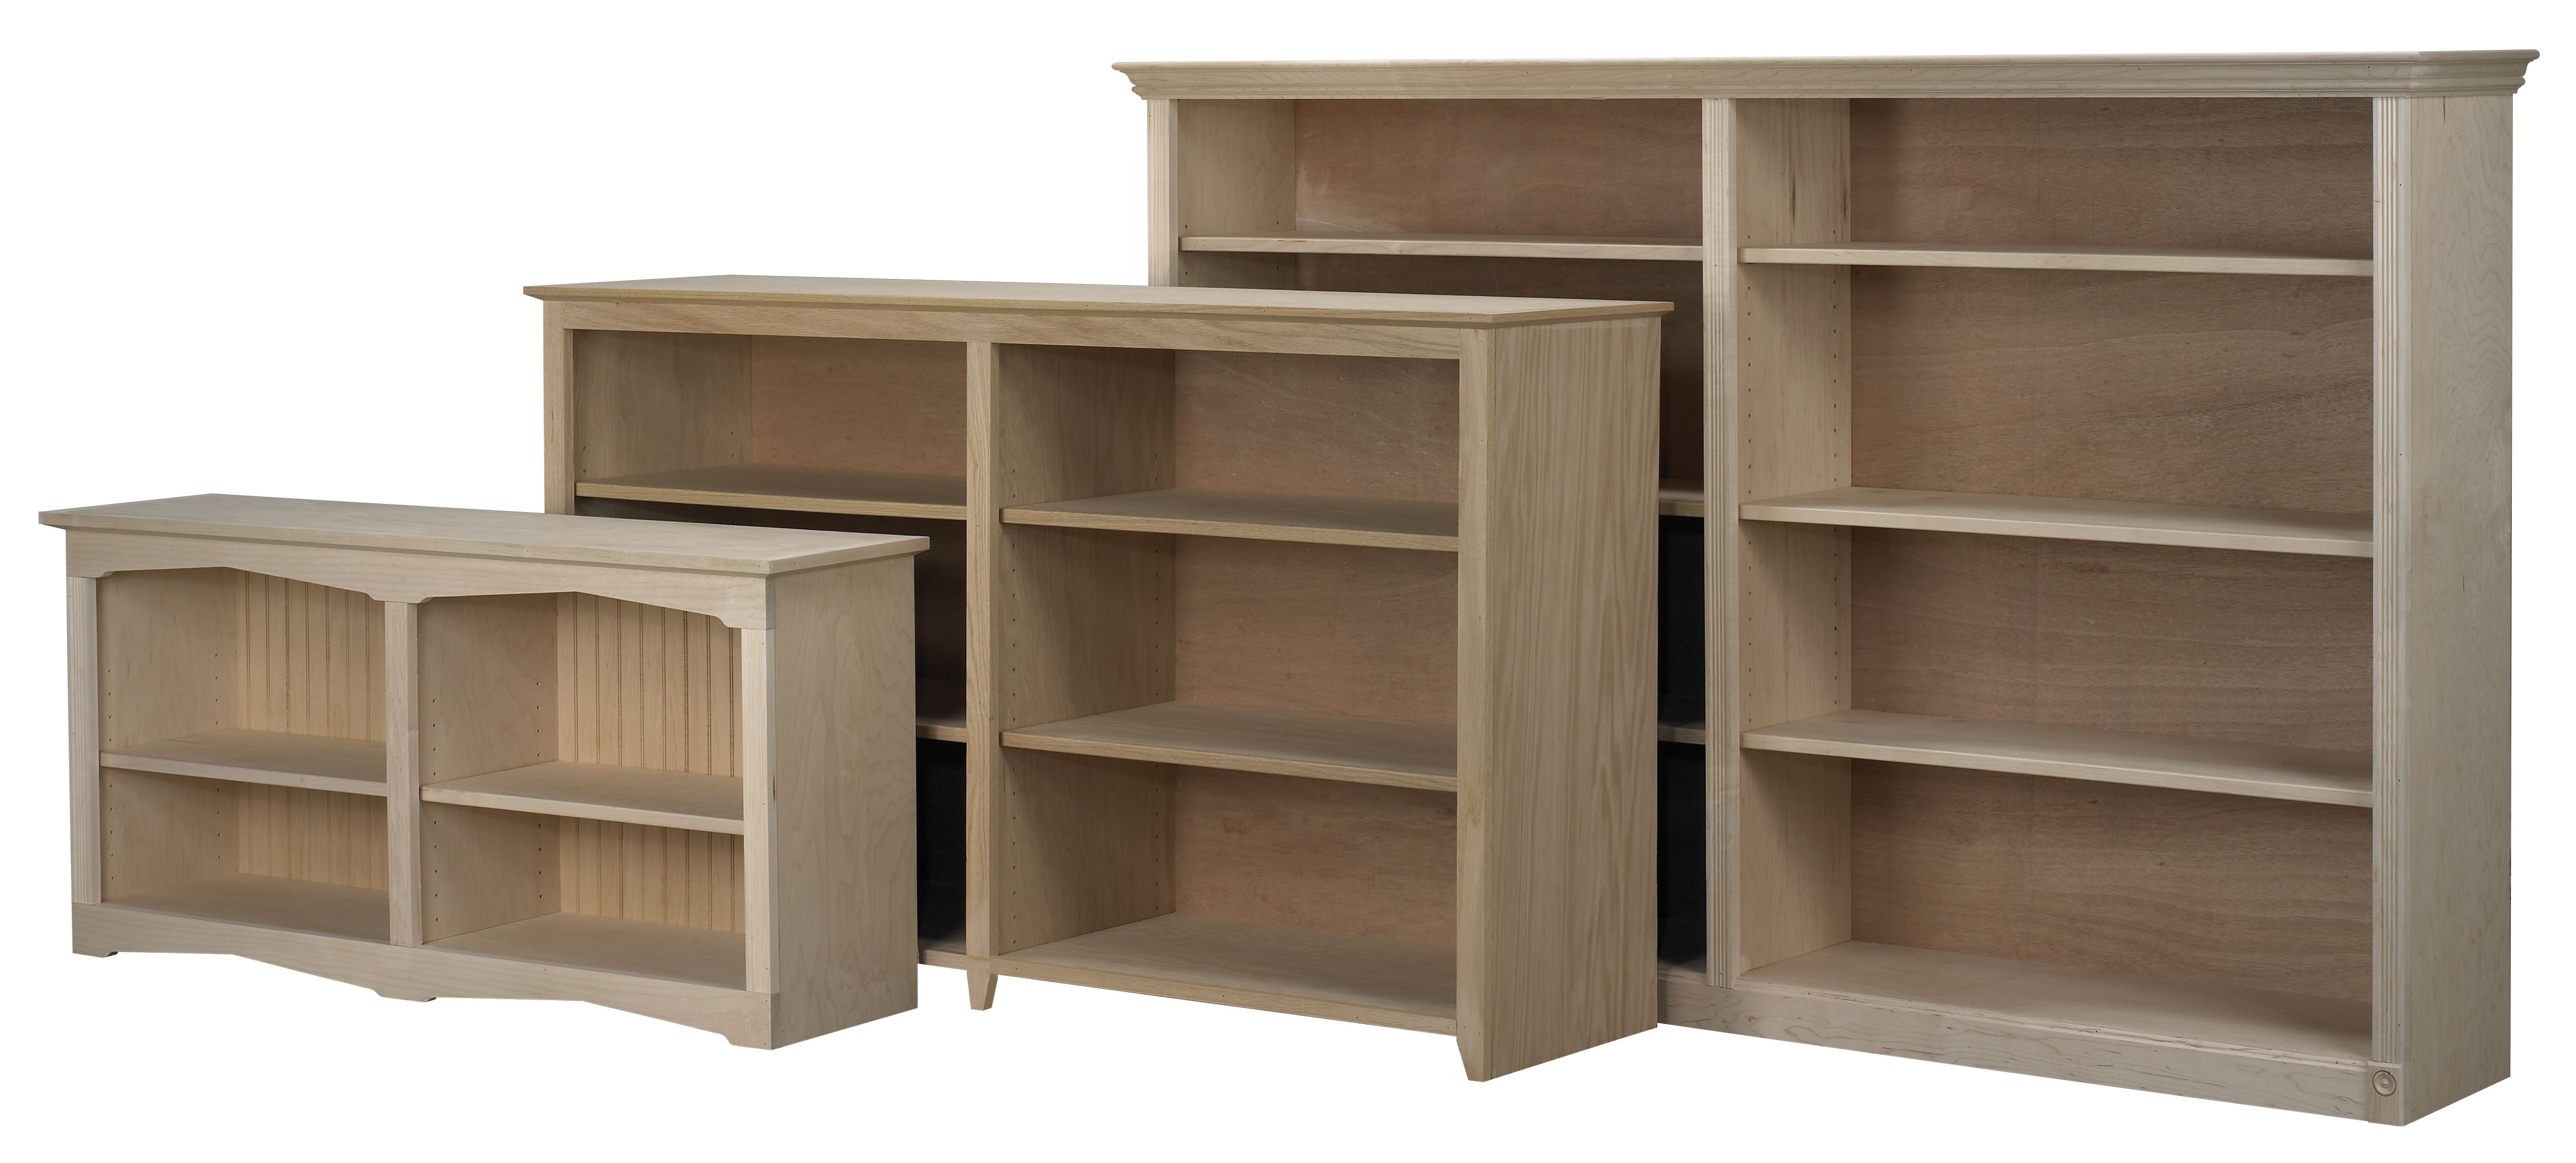 Wide Bookcases Inside Most Popular Bookcases Ideas: Furniture And Home Decor Search: 48 Inch Bookcase (View 1 of 15)